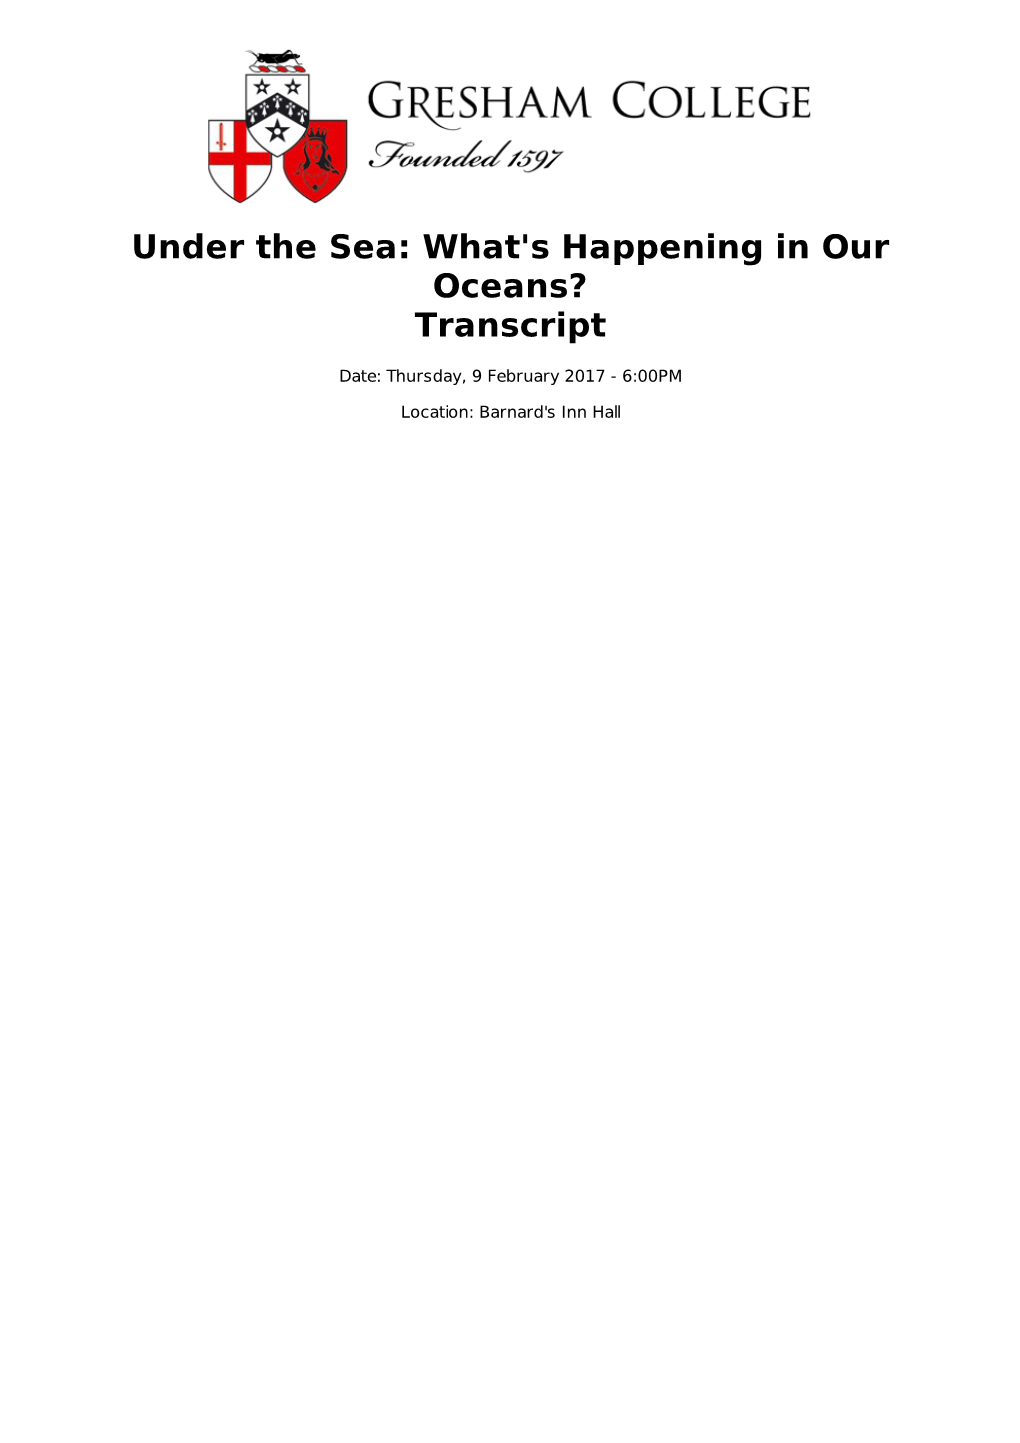 Under the Sea: What's Happening in Our Oceans? Transcript